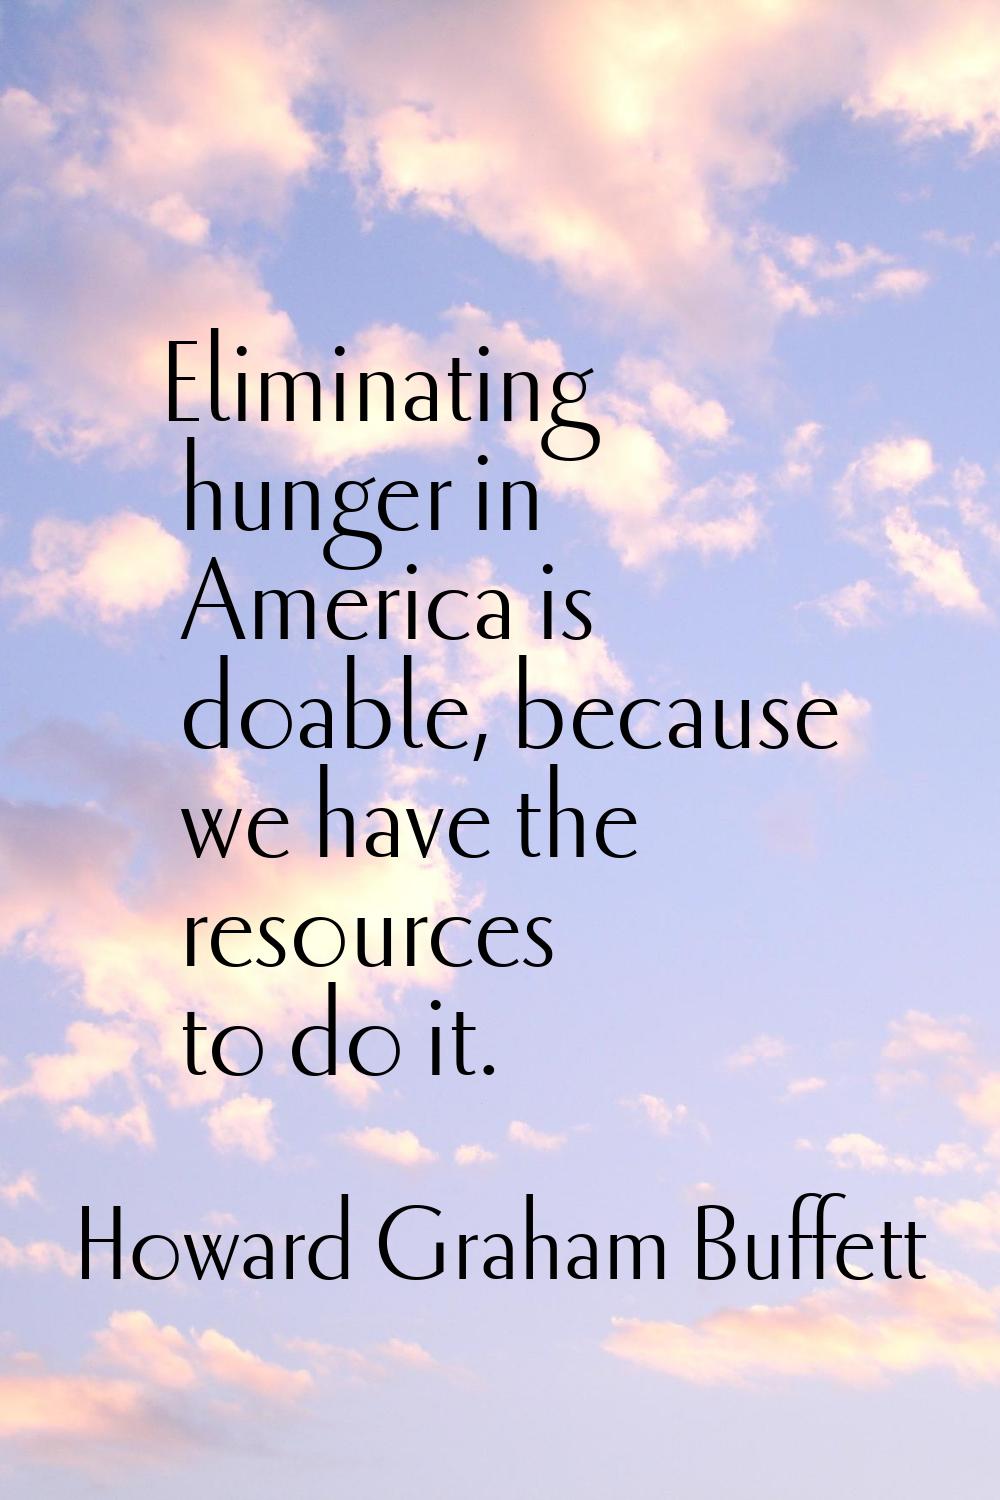 Eliminating hunger in America is doable, because we have the resources to do it.